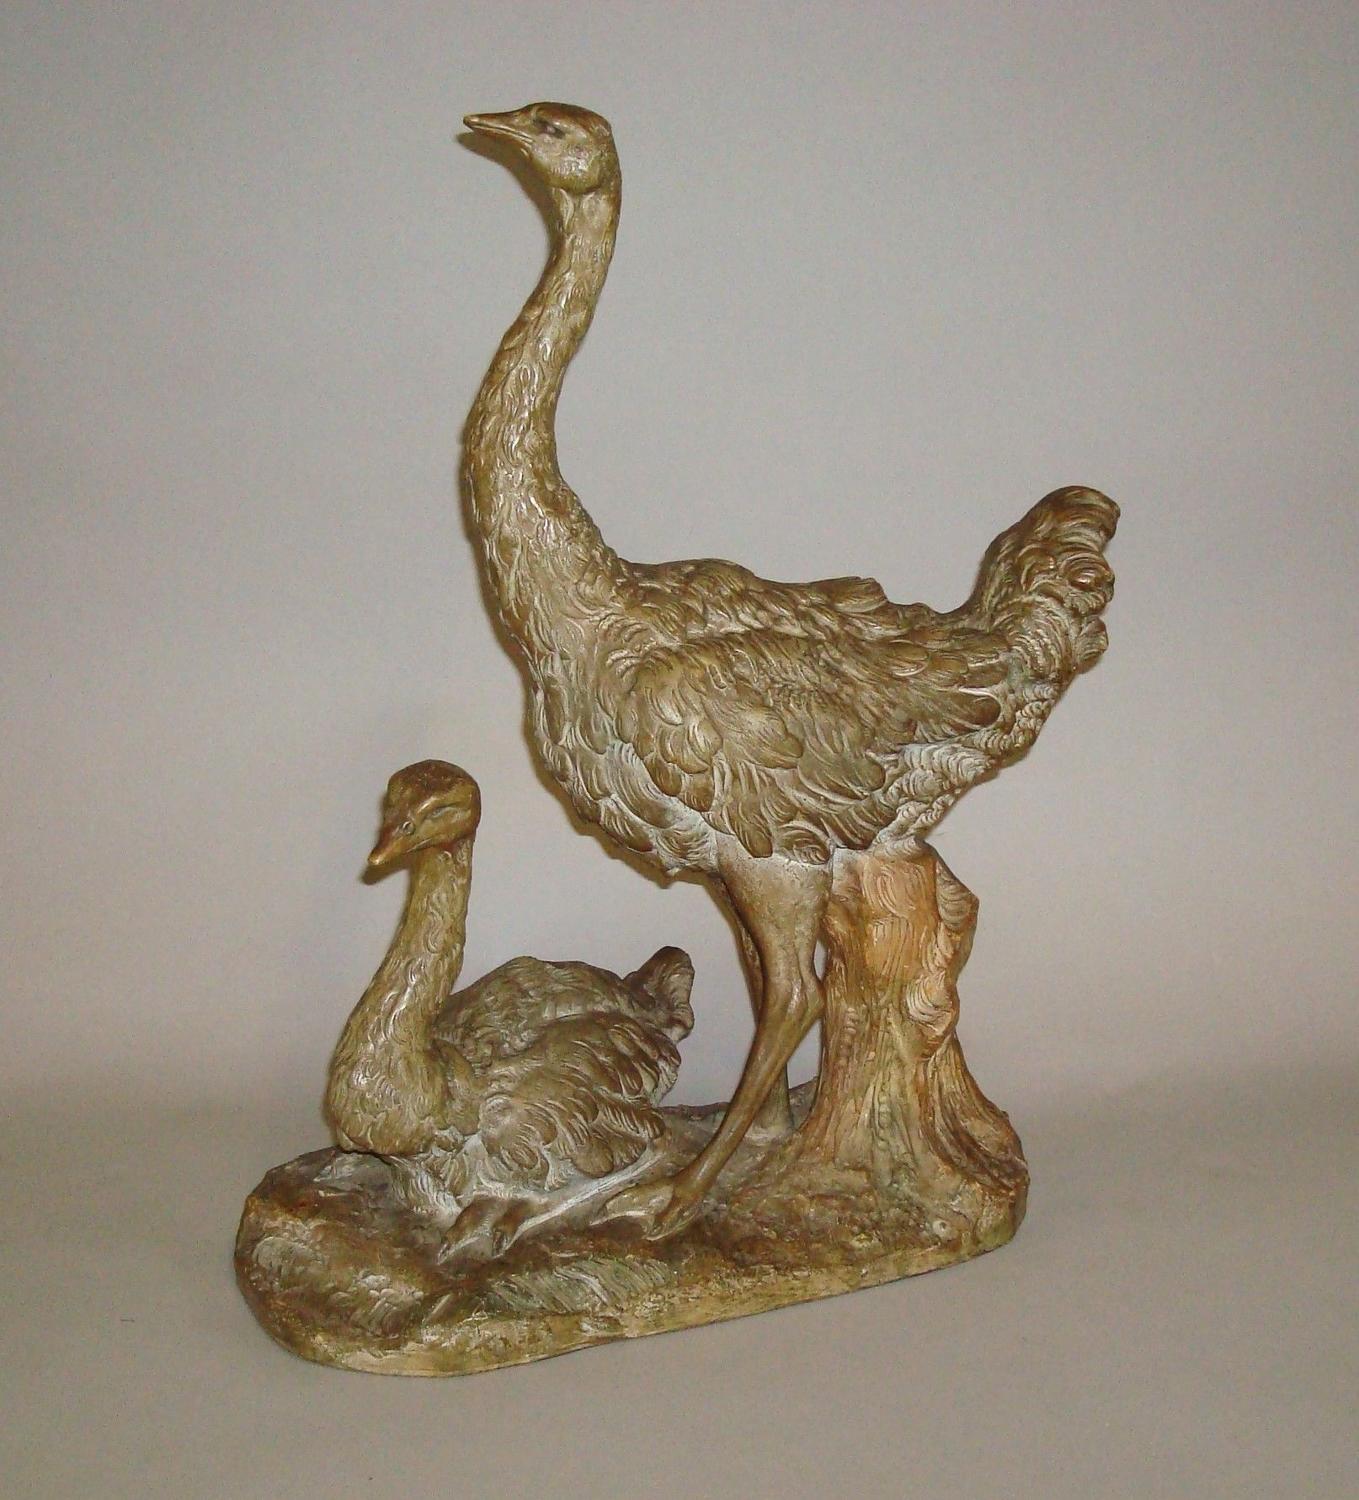 20th century terracotta sculpture of two ostriches